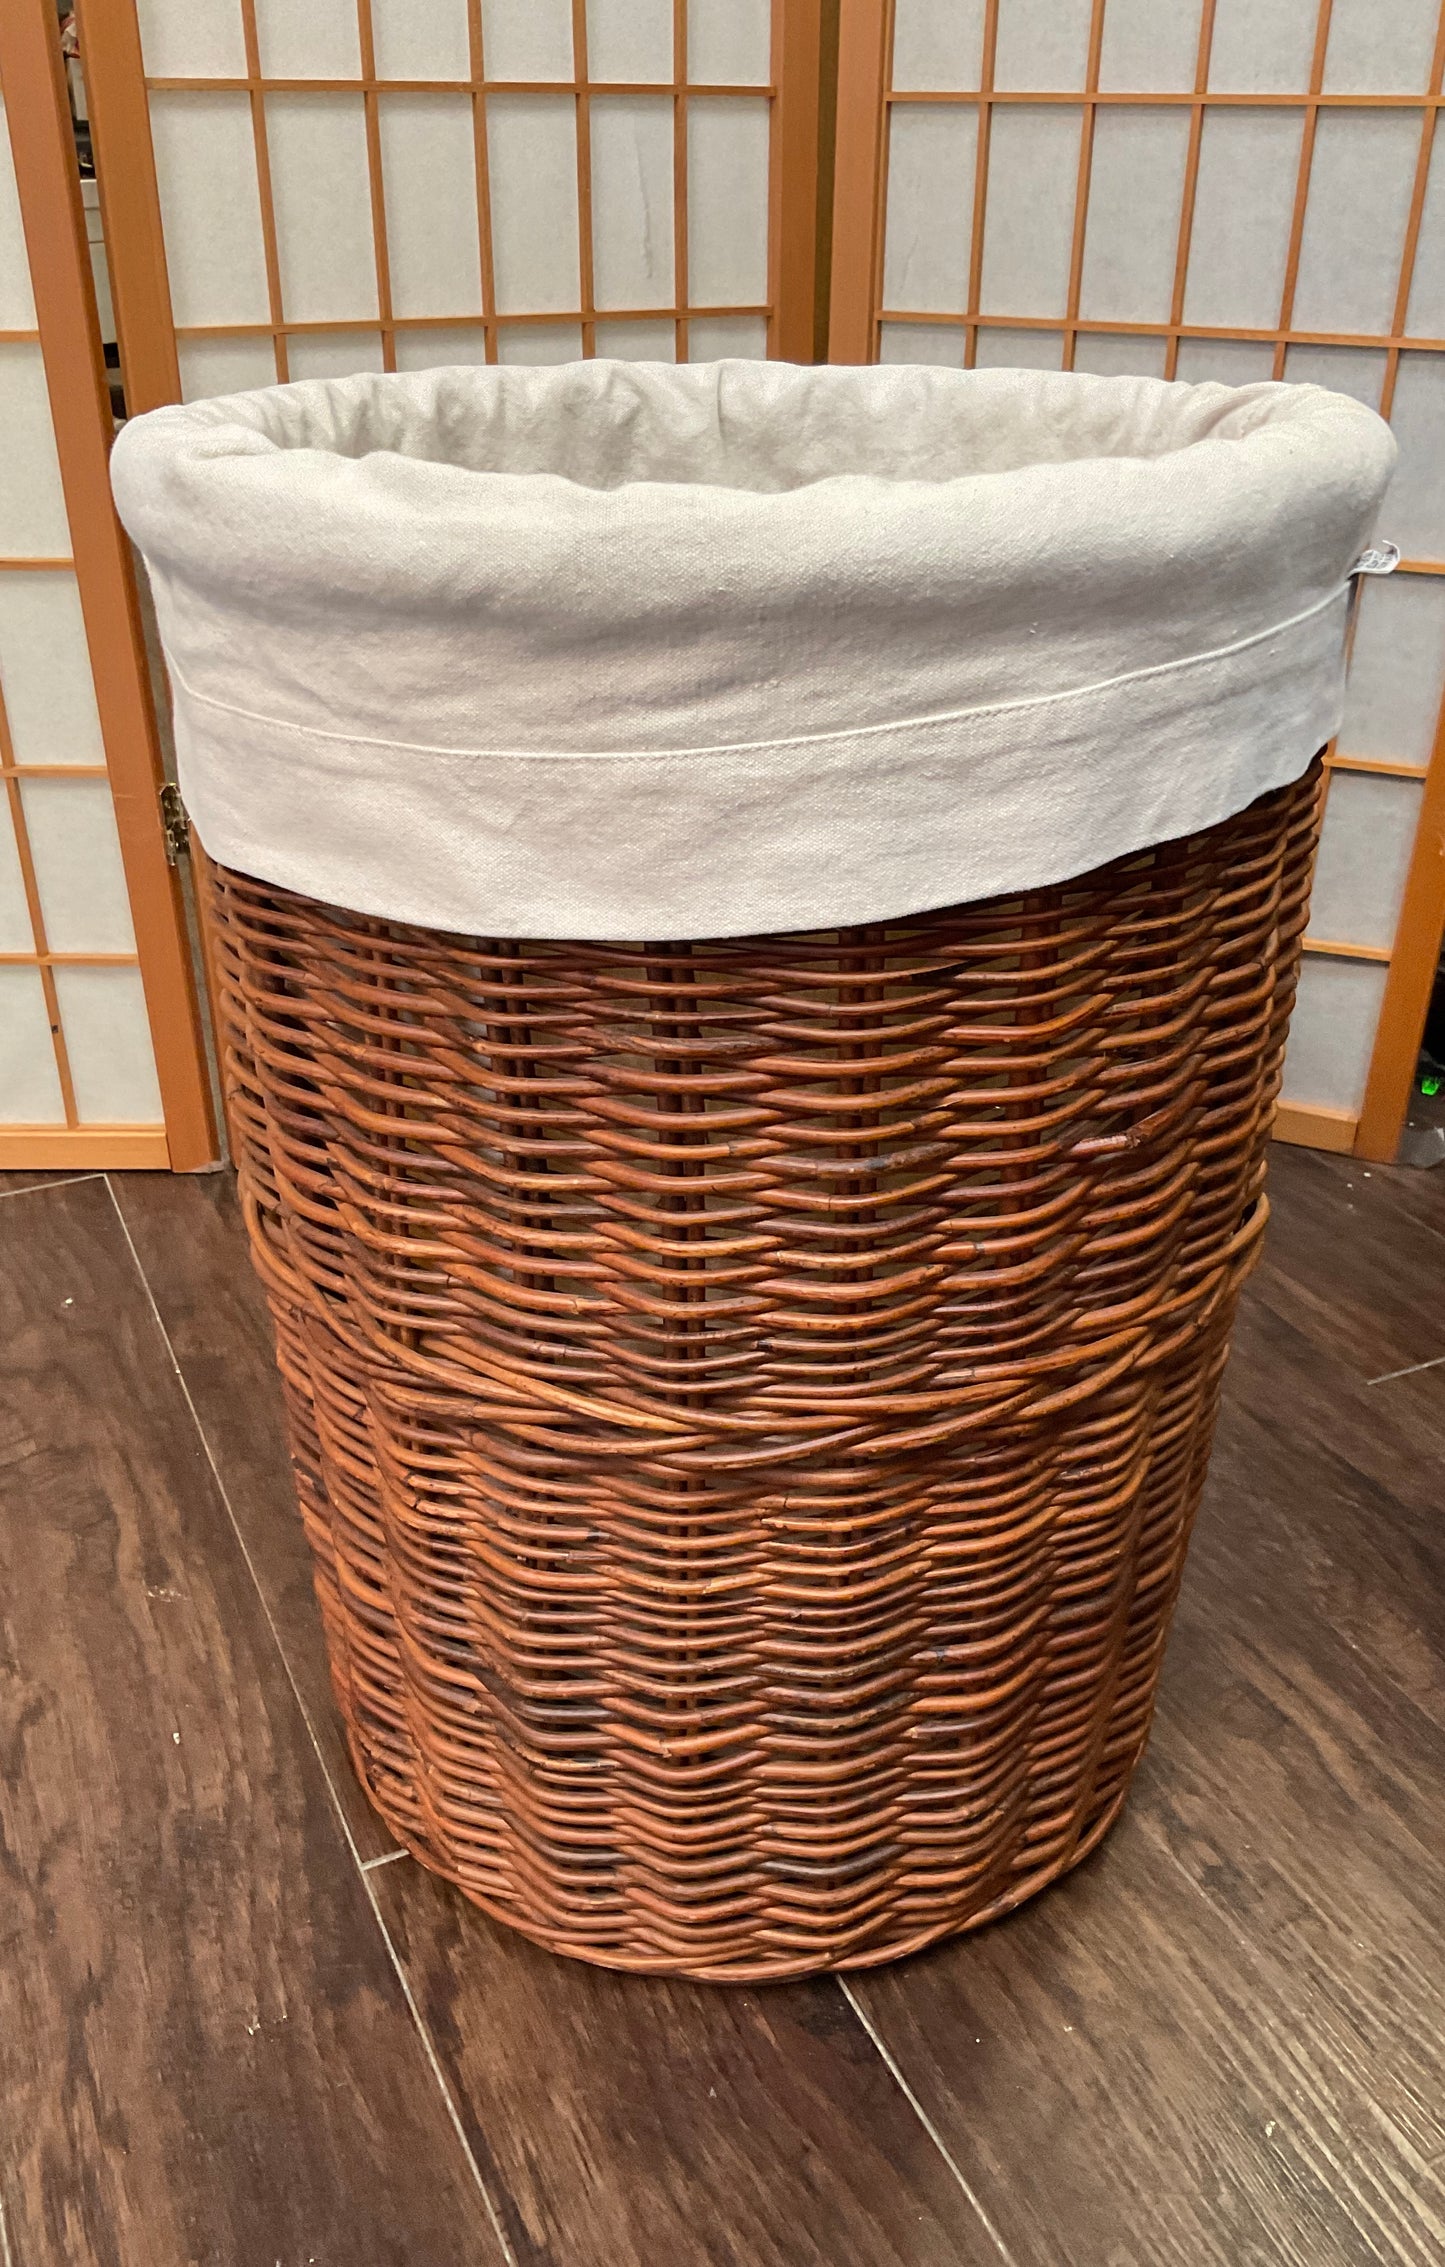 Rattan Laundry Basket, Lined